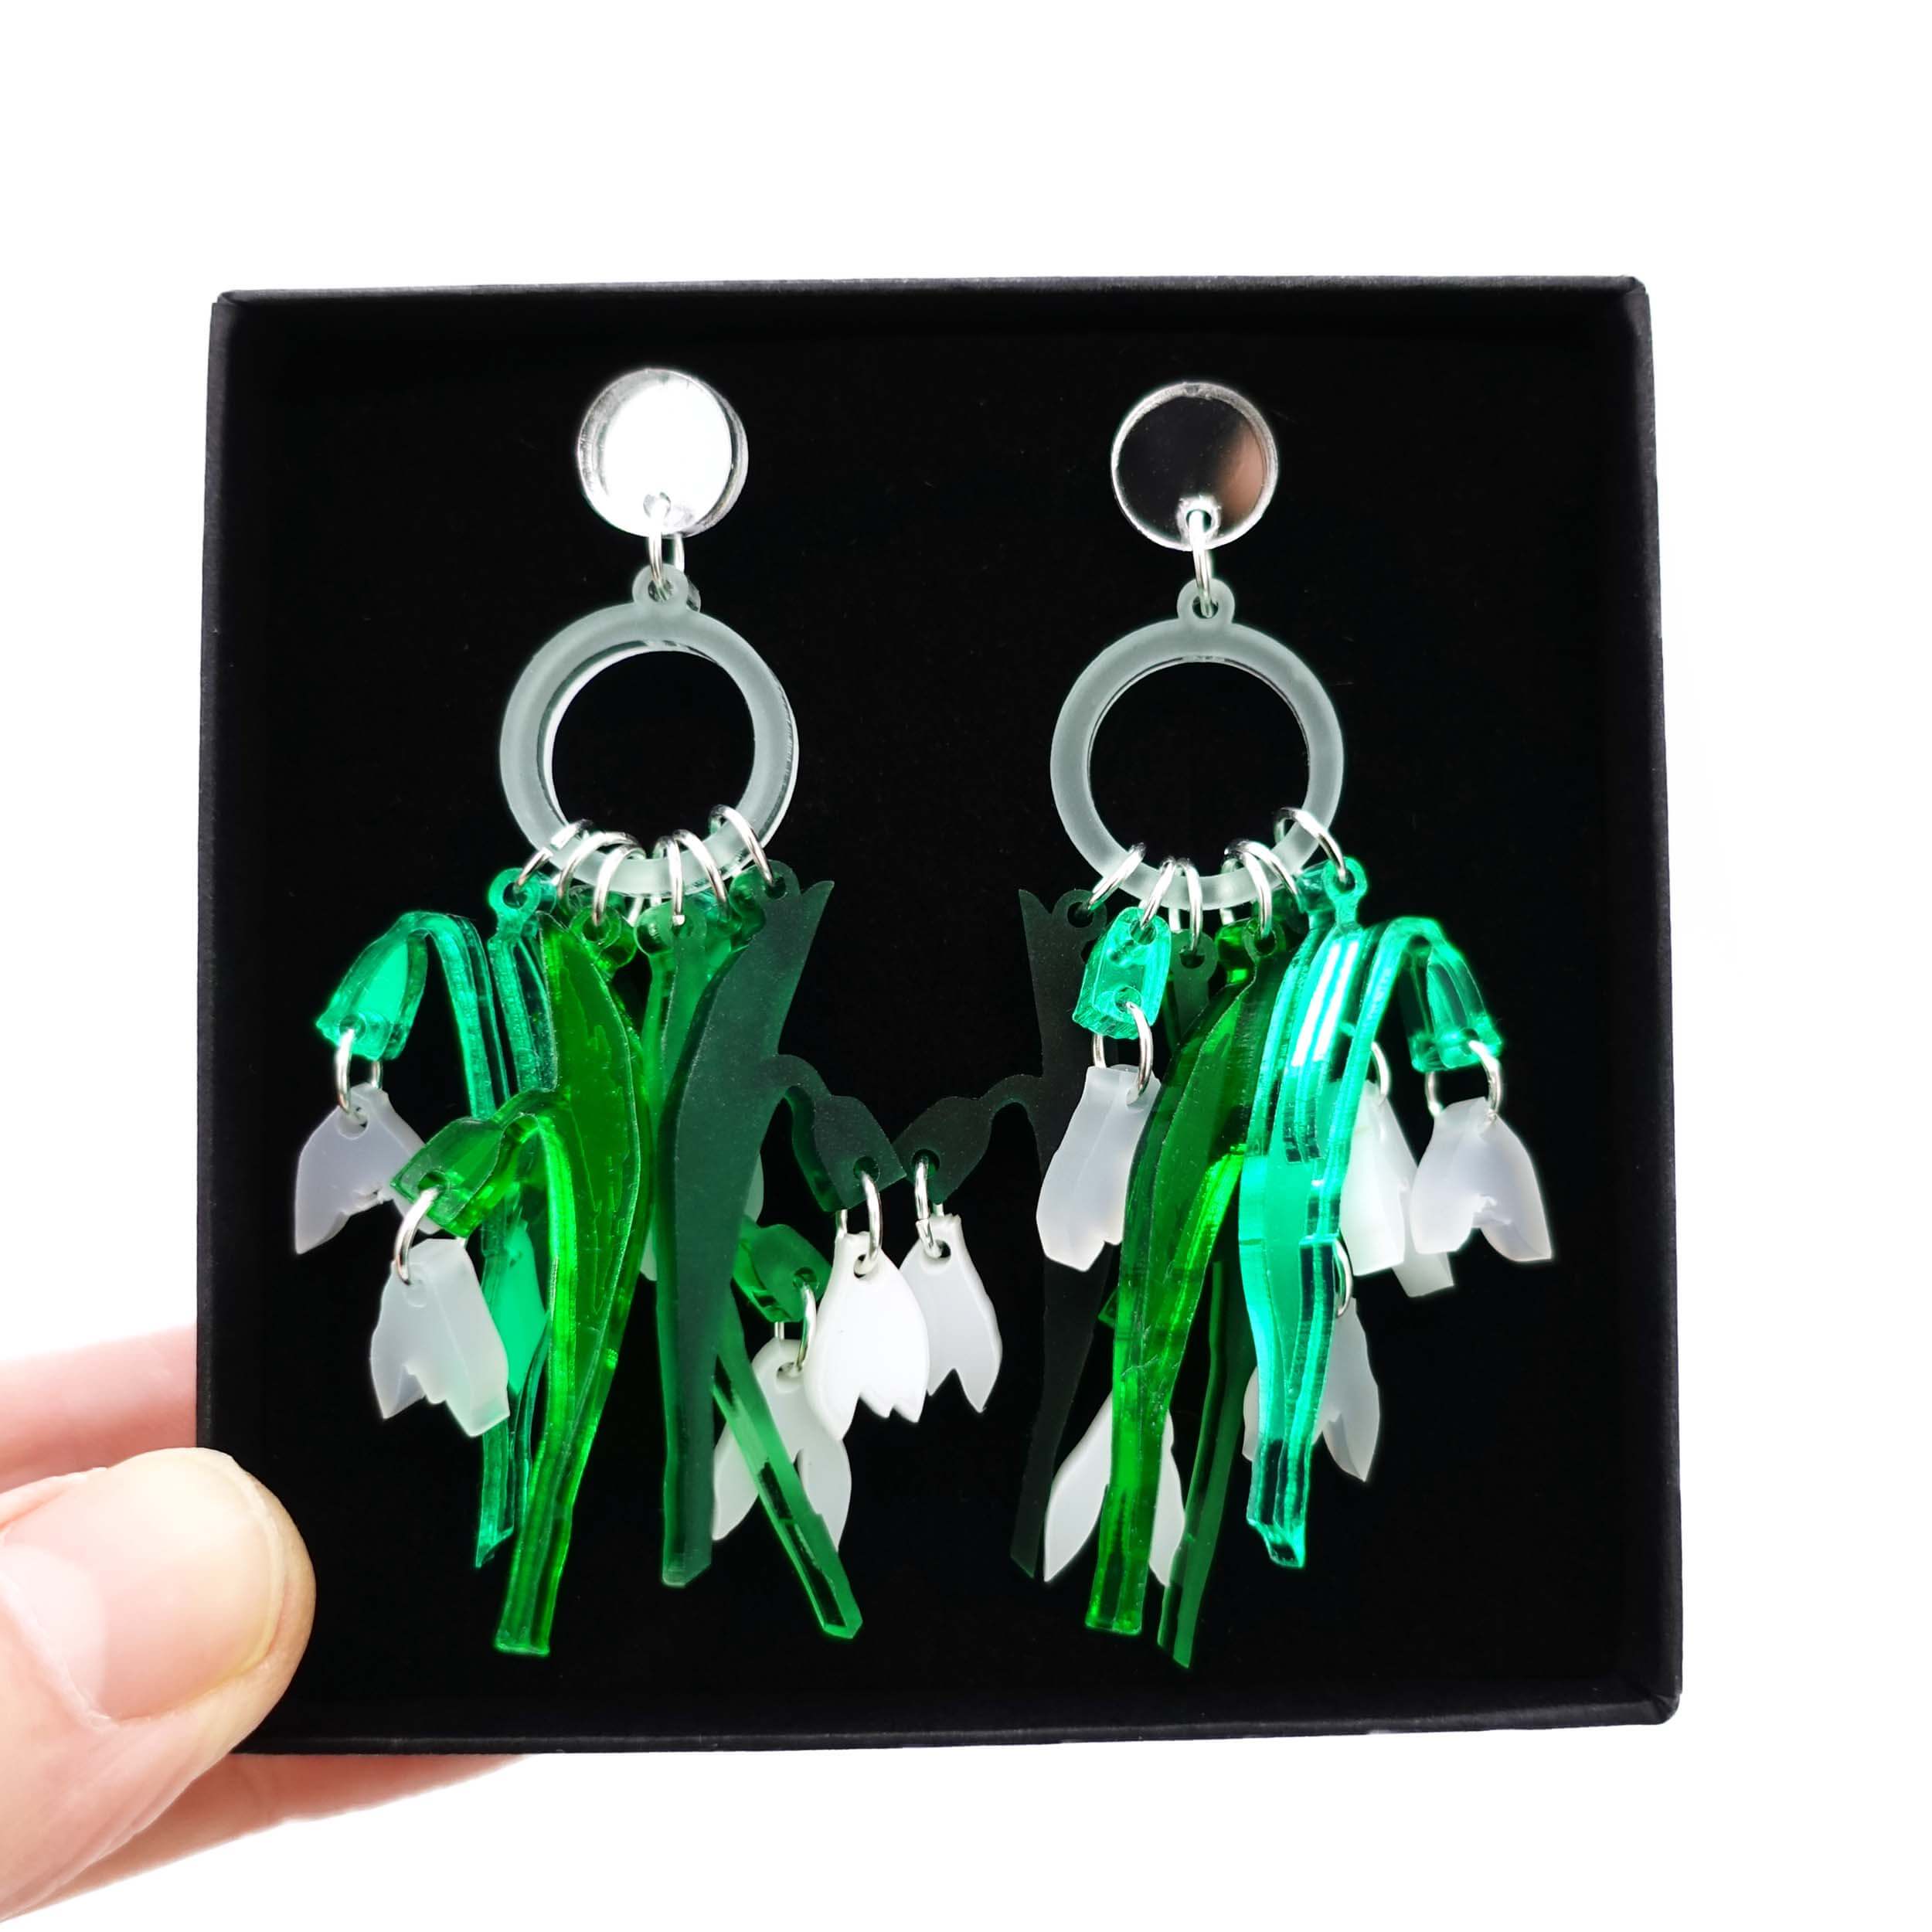 Snowdrop earrings designed by Sarah Day for Wear and Resist. 